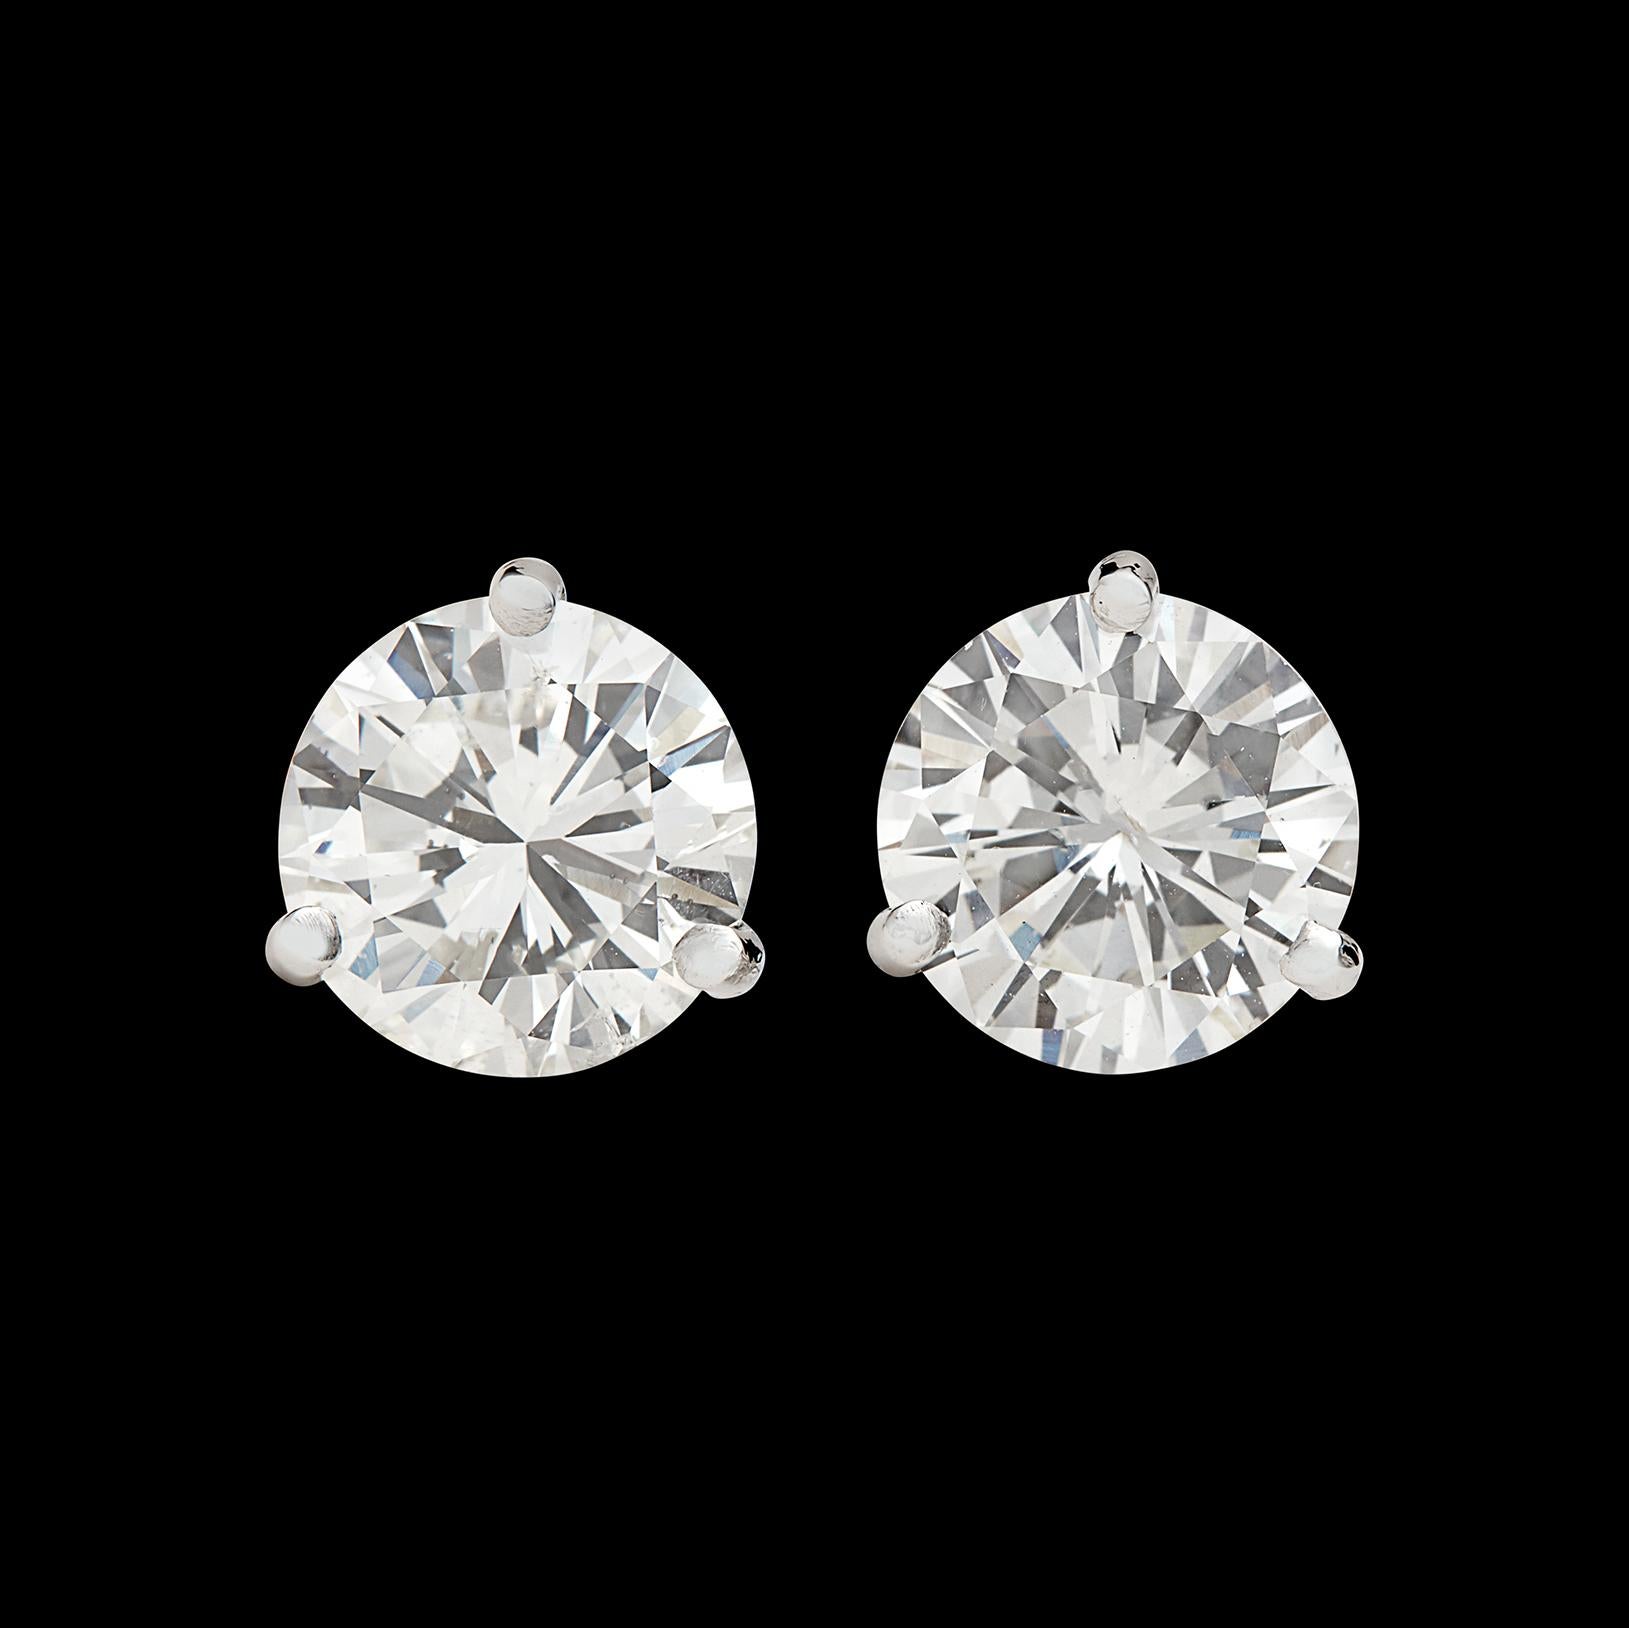 Conversations will stop when wearing theses earrings! Set in three-prong platinum mounts, the 2.02 ct round brilliant-cut diamonds average H-I color and SI2 clarity, and together weigh a significant 4.04 carats. These bright and sparkling headlights